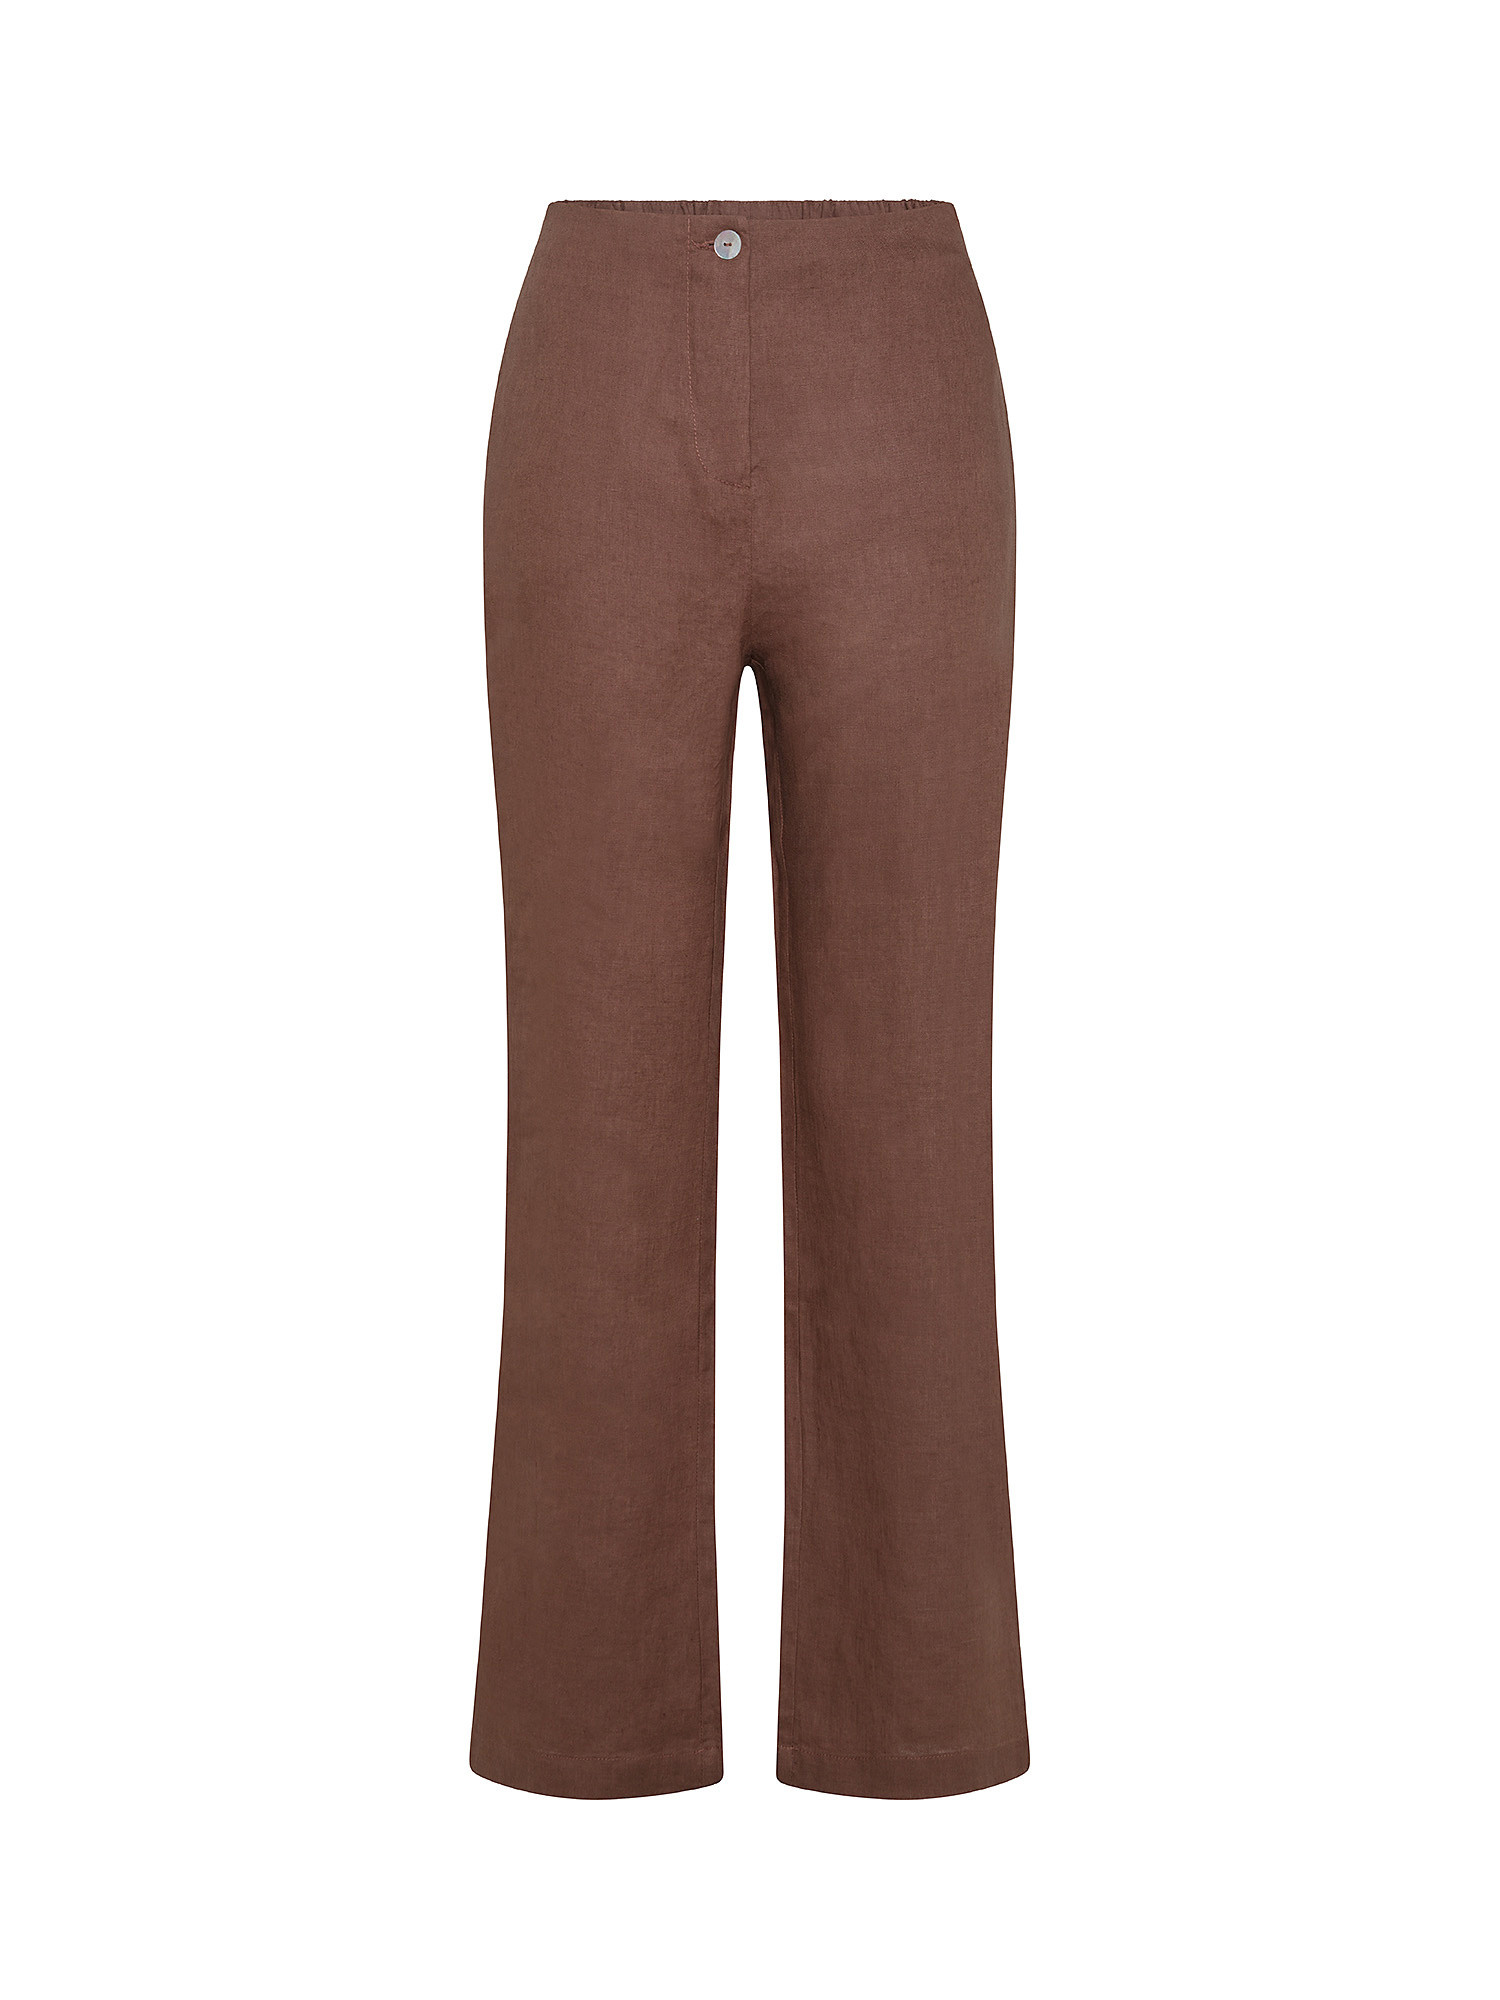 Koan - Straight linen trousers, Brown, large image number 0